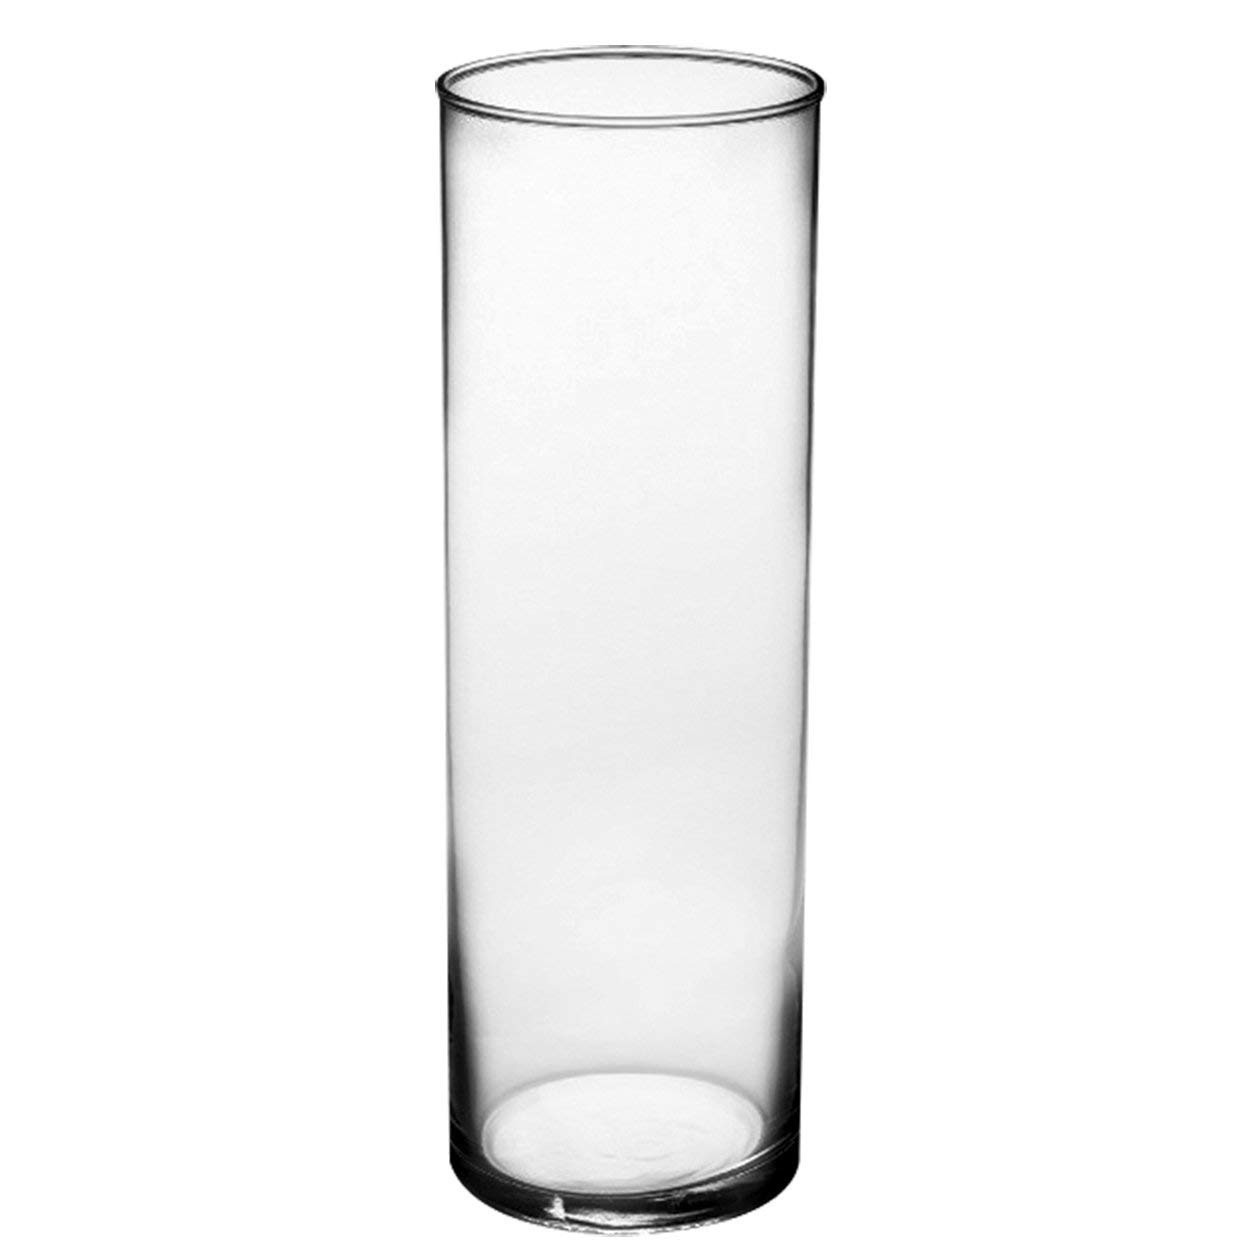 20 Unique Glass Cylinder Vases 12 2024 free download glass cylinder vases 12 of amazon com syndicate sales 3 1 2 x 10 1 2 cylinder vase clear within amazon com syndicate sales 3 1 2 x 10 1 2 cylinder vase clear planters garden outdoor